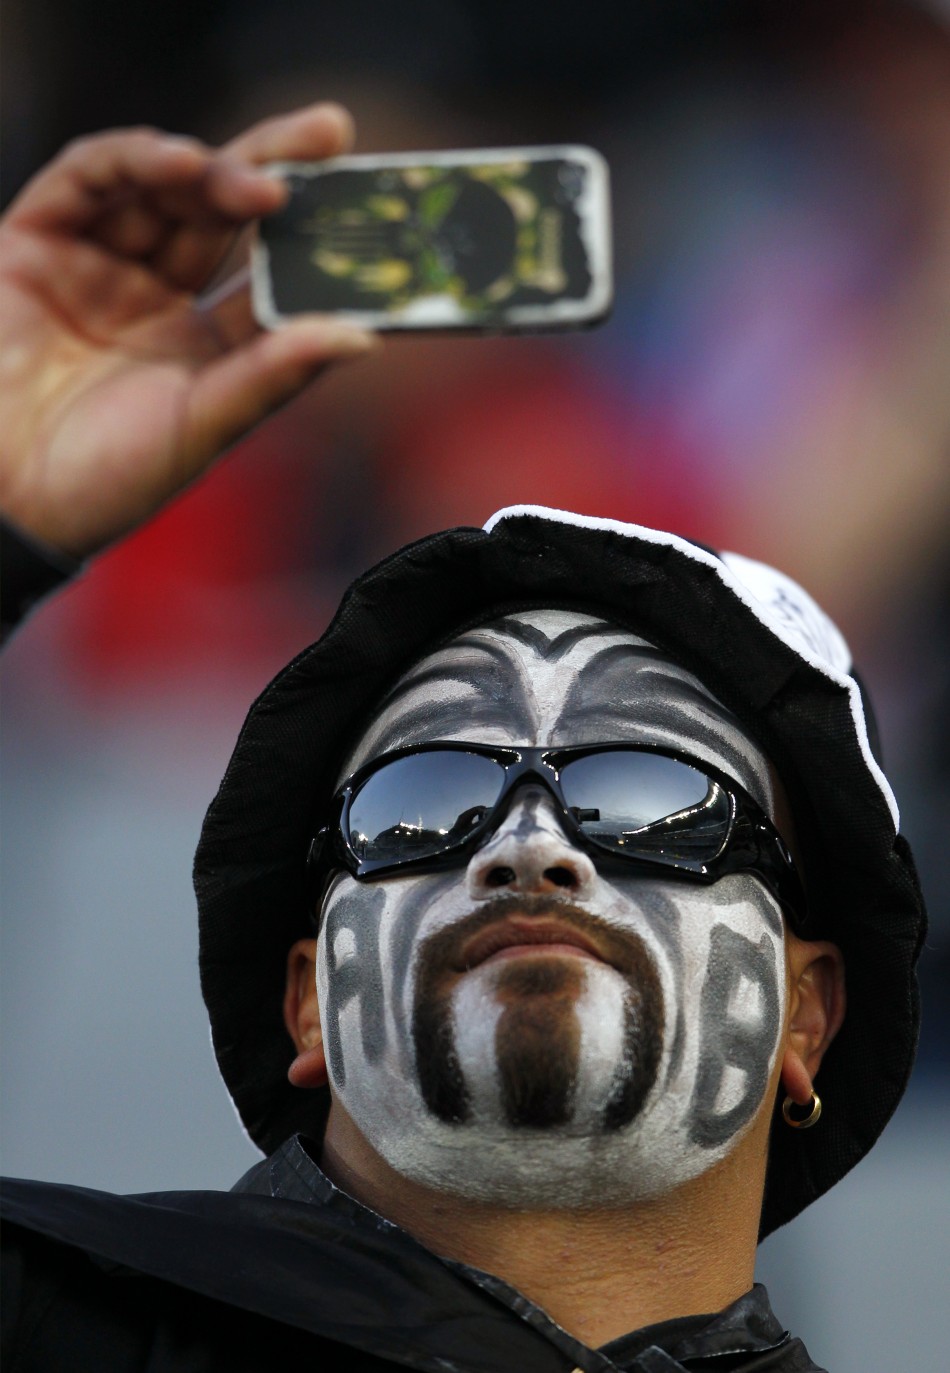 A New Zealand All Blacks039 fan takes a picture with his mobile phone before their Rugby World Cup final match against France at Eden Park in Auckland.